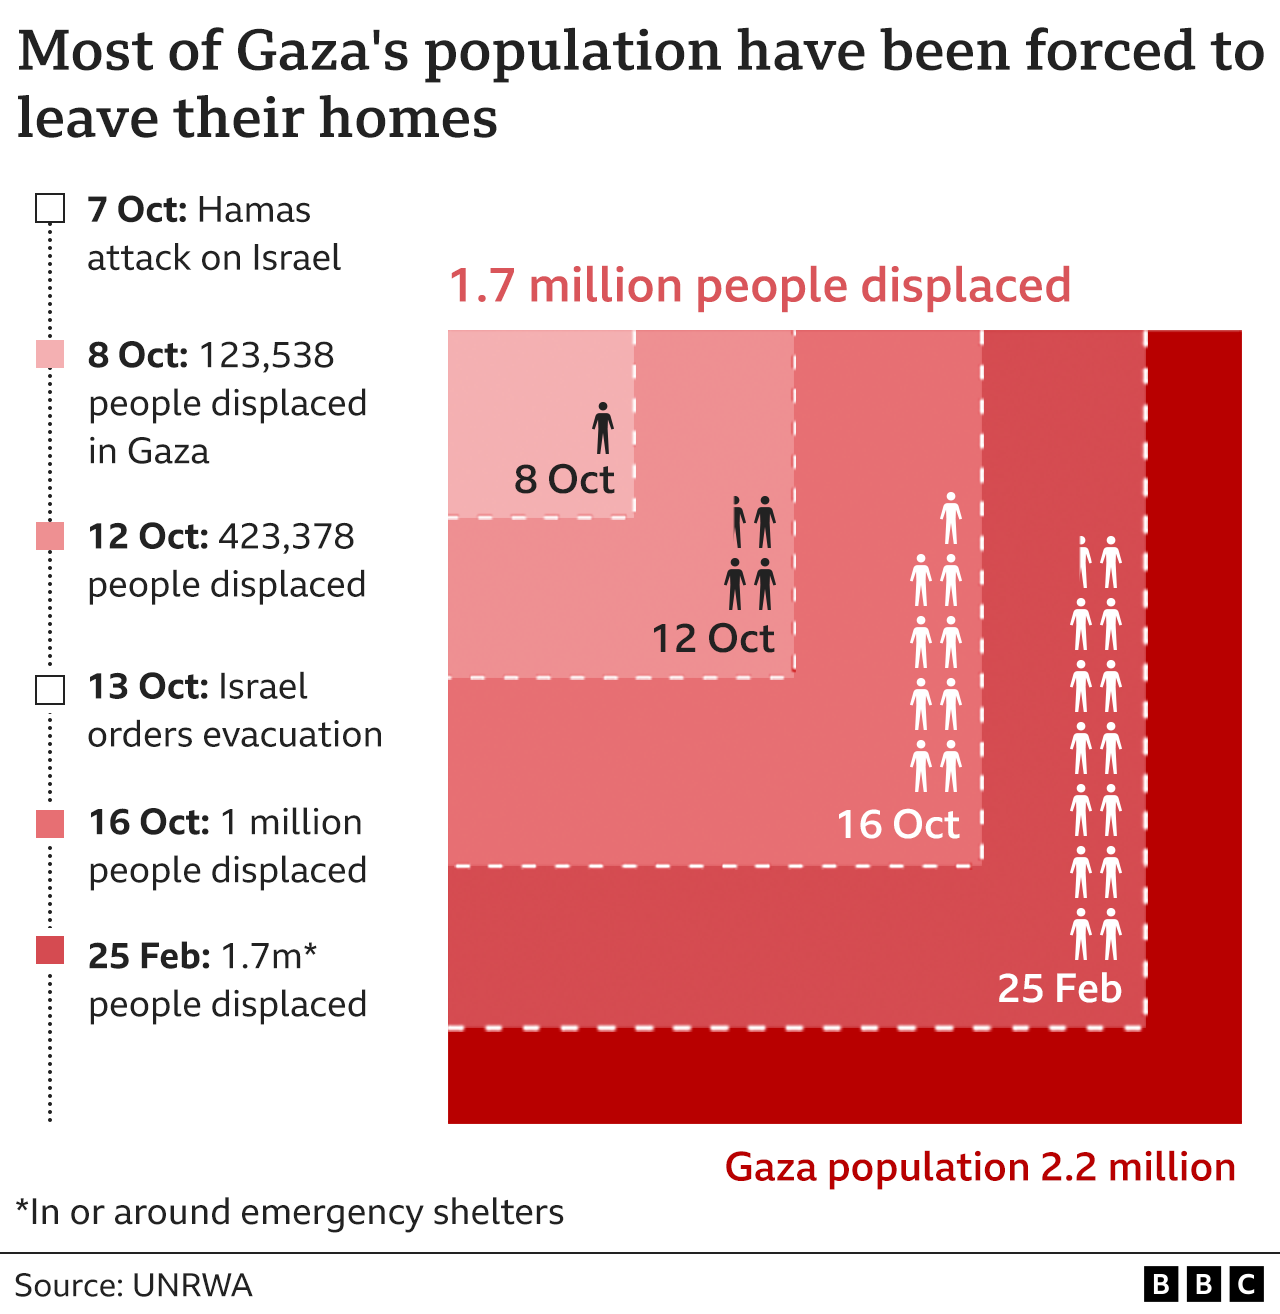 Graphic showing that 1.7 million people in Gaza have had to leave their homes since 7 October 2023 out of a total population of 2.2 million.